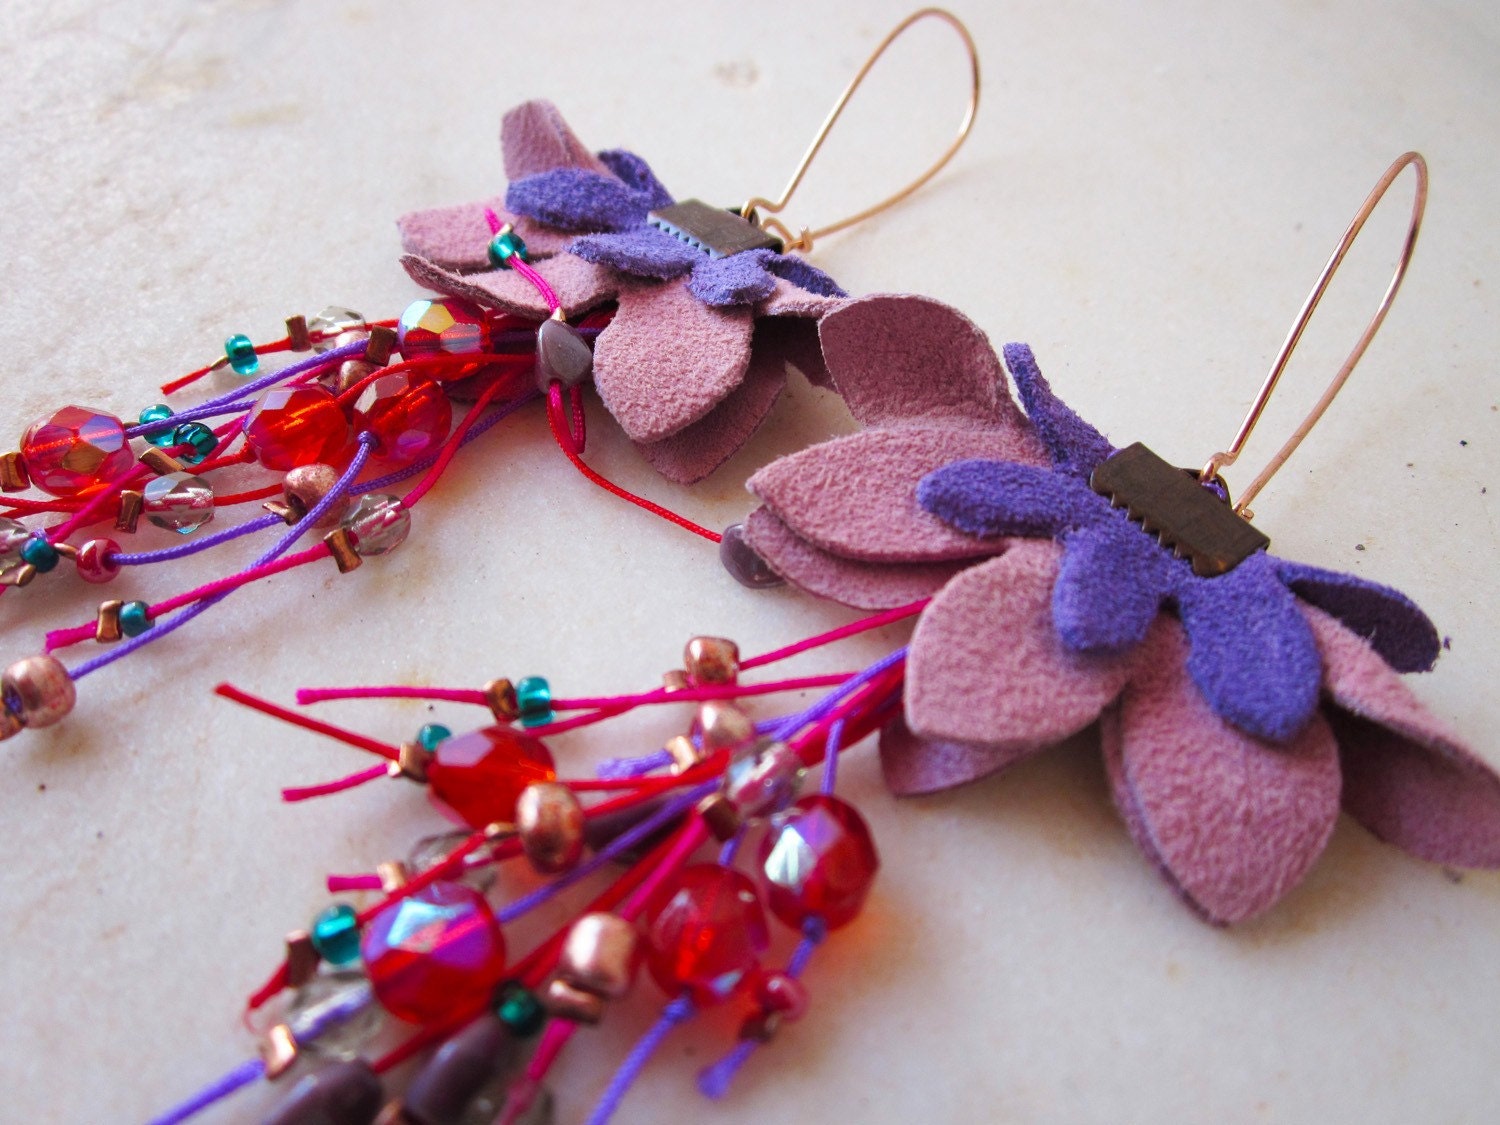 Flower leather earrings with colorful threads, glass and czech crystal beads - 10% off with coupon code FEBPOA